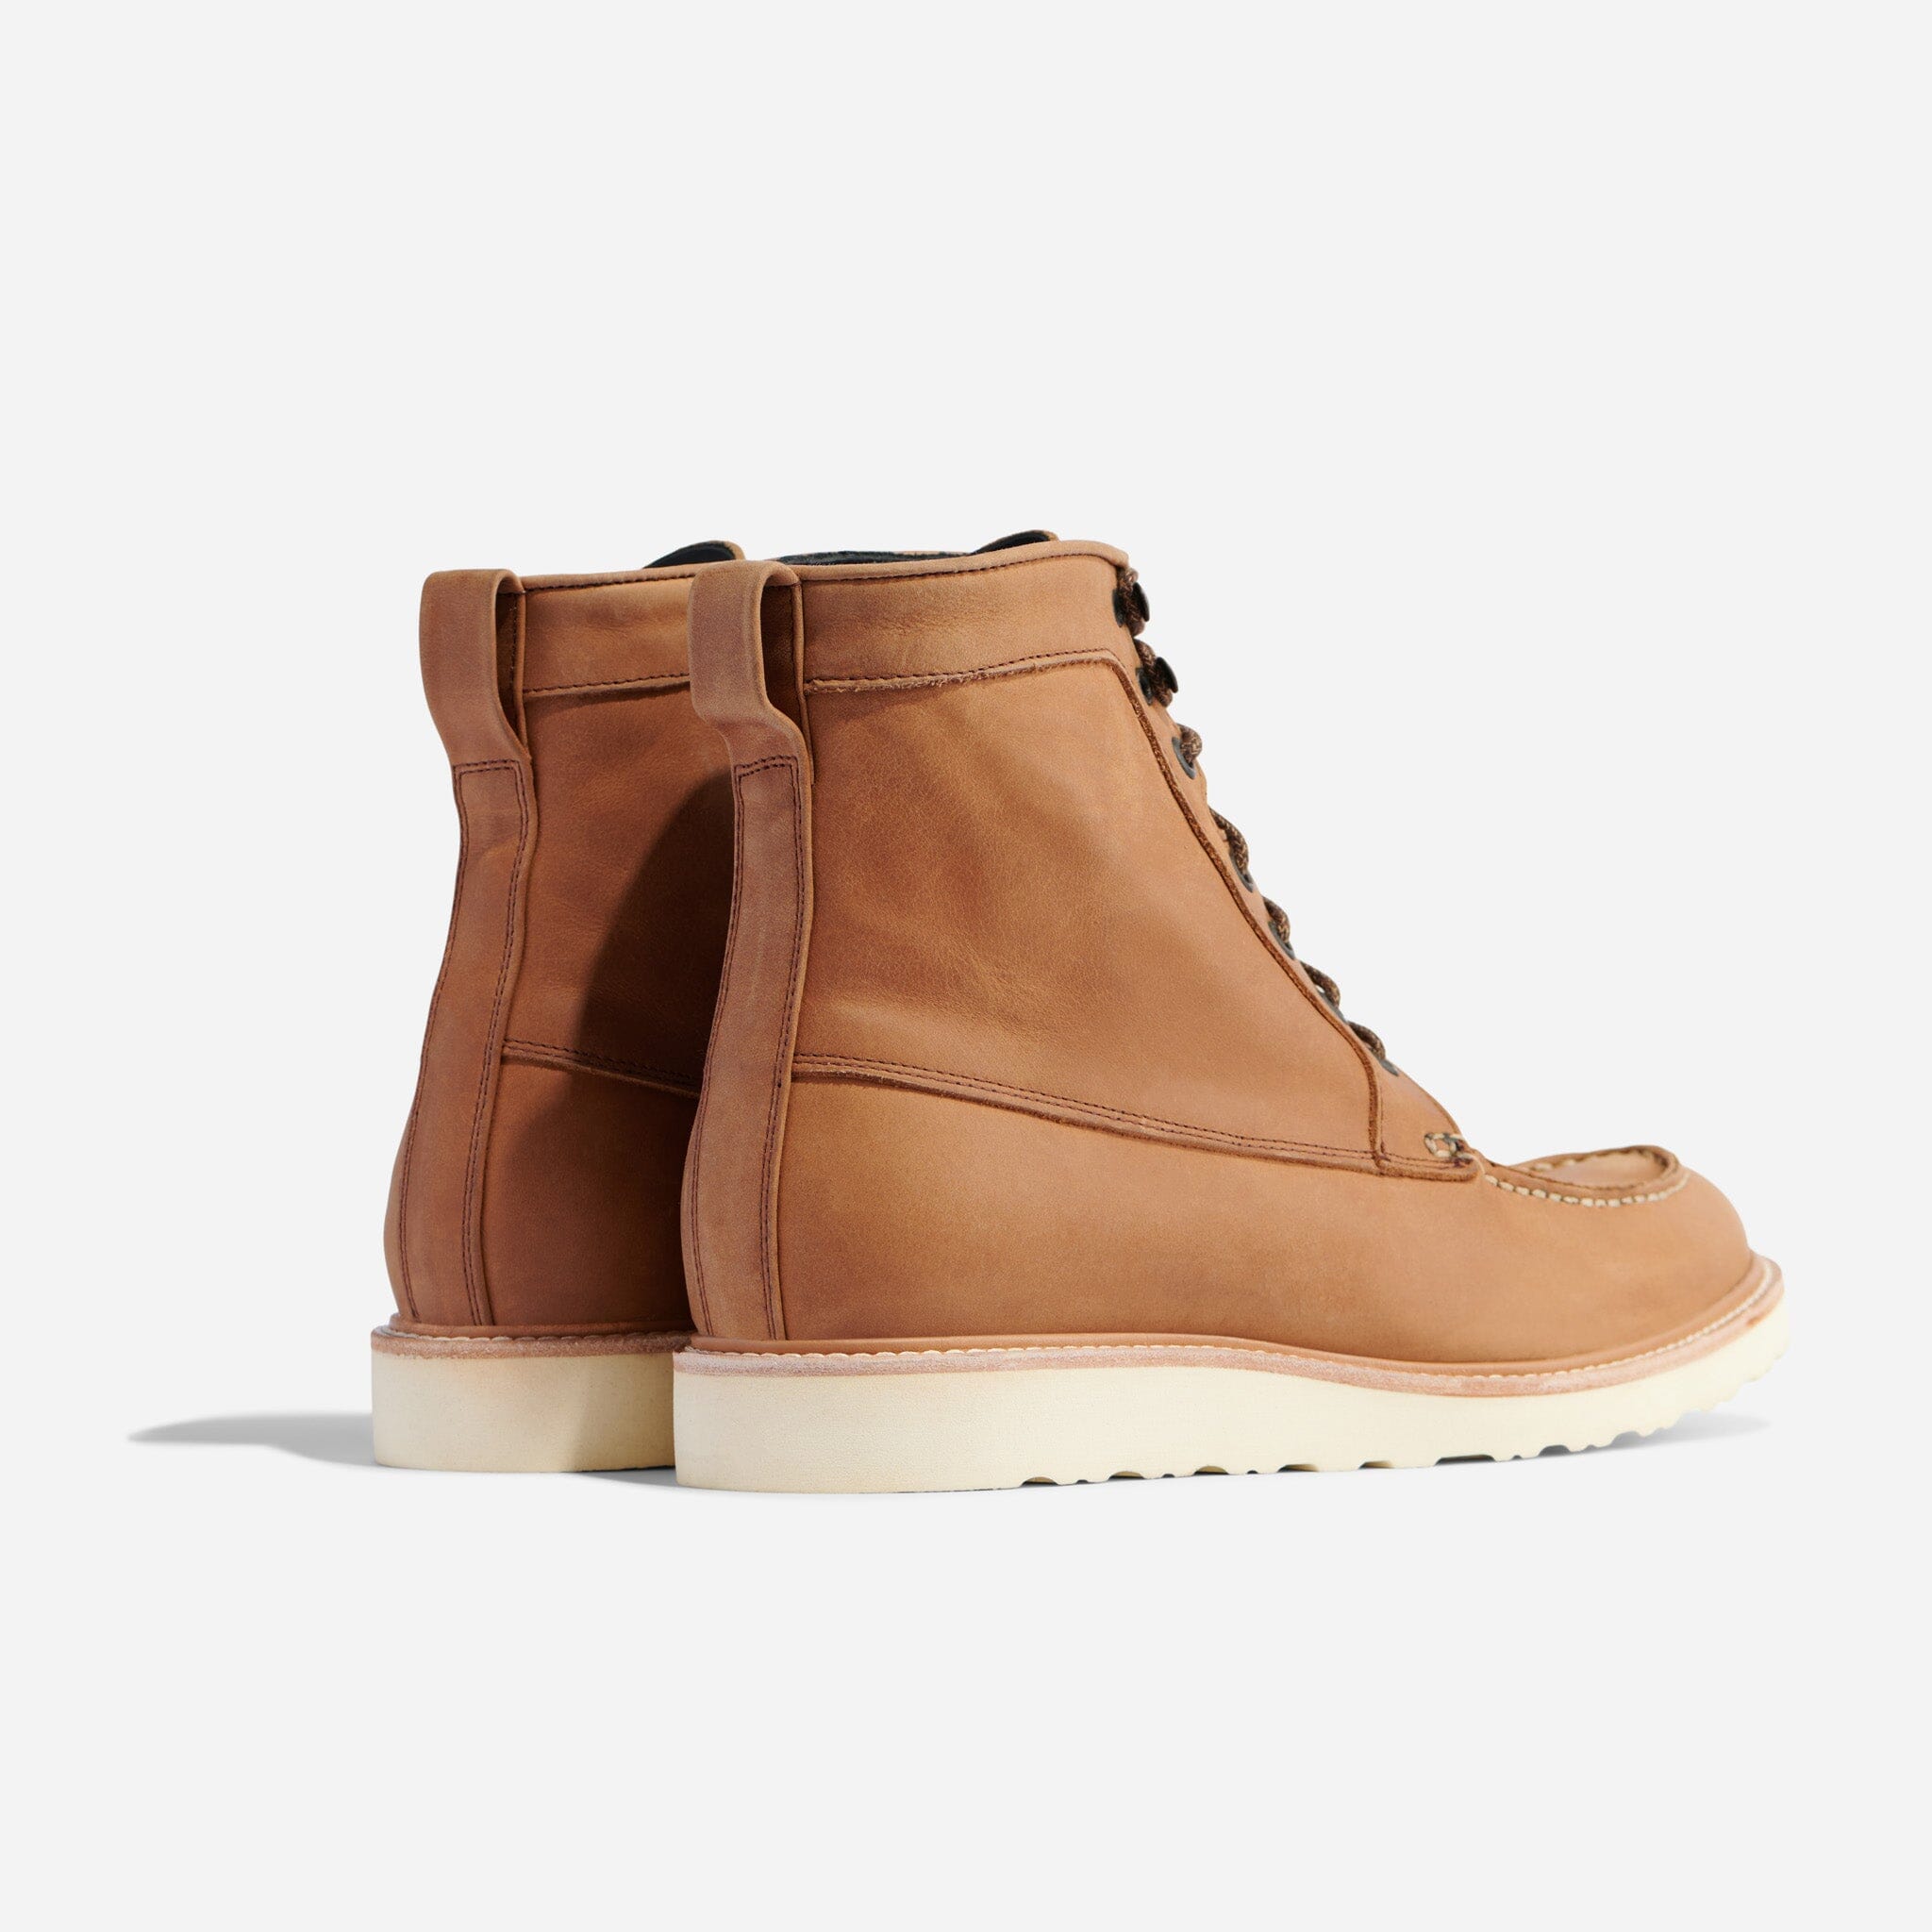 Tobacco All-Weather Boot Mateo